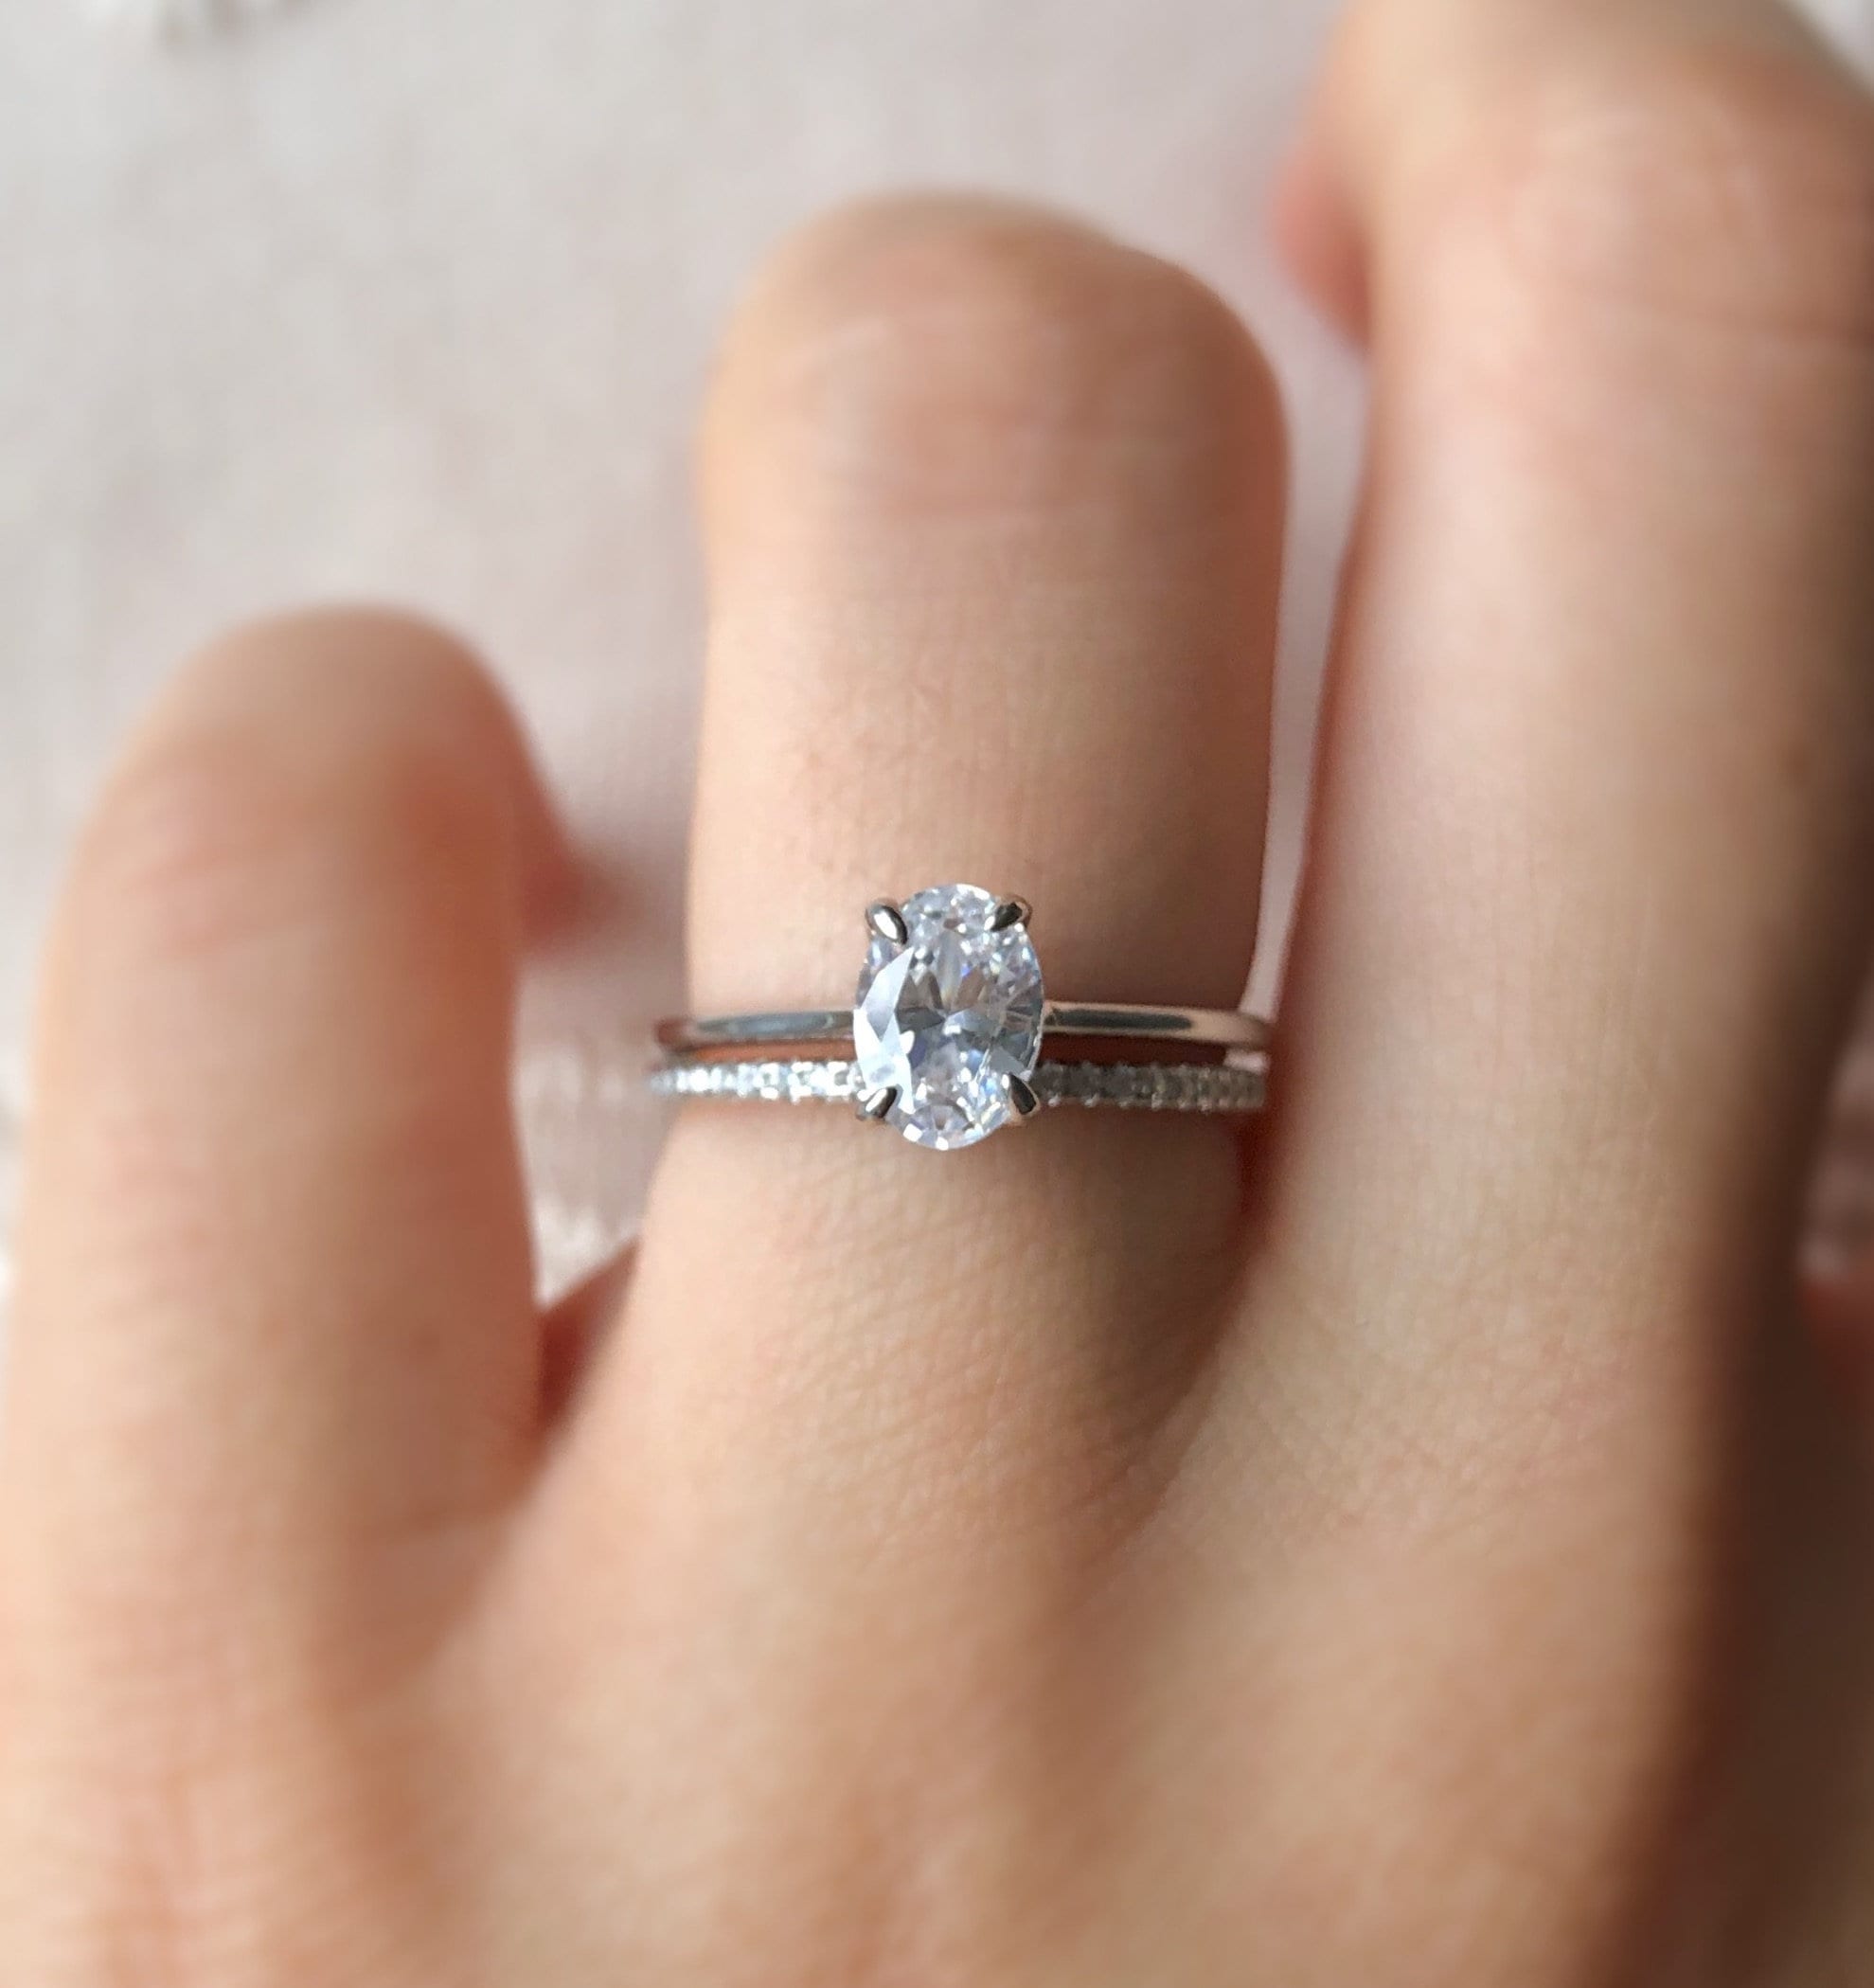 Engagement Rings-Solitaire engagement ring-Wedding Bands-Solitaire rings-Promise rings-Bridal Sets